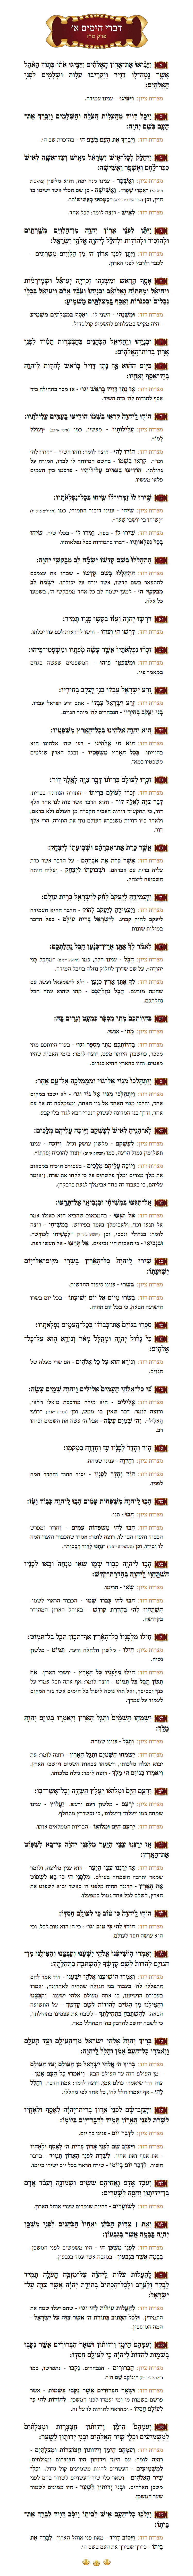 Sefer Divrei Hayomim 1 Chapter 16 with commentary